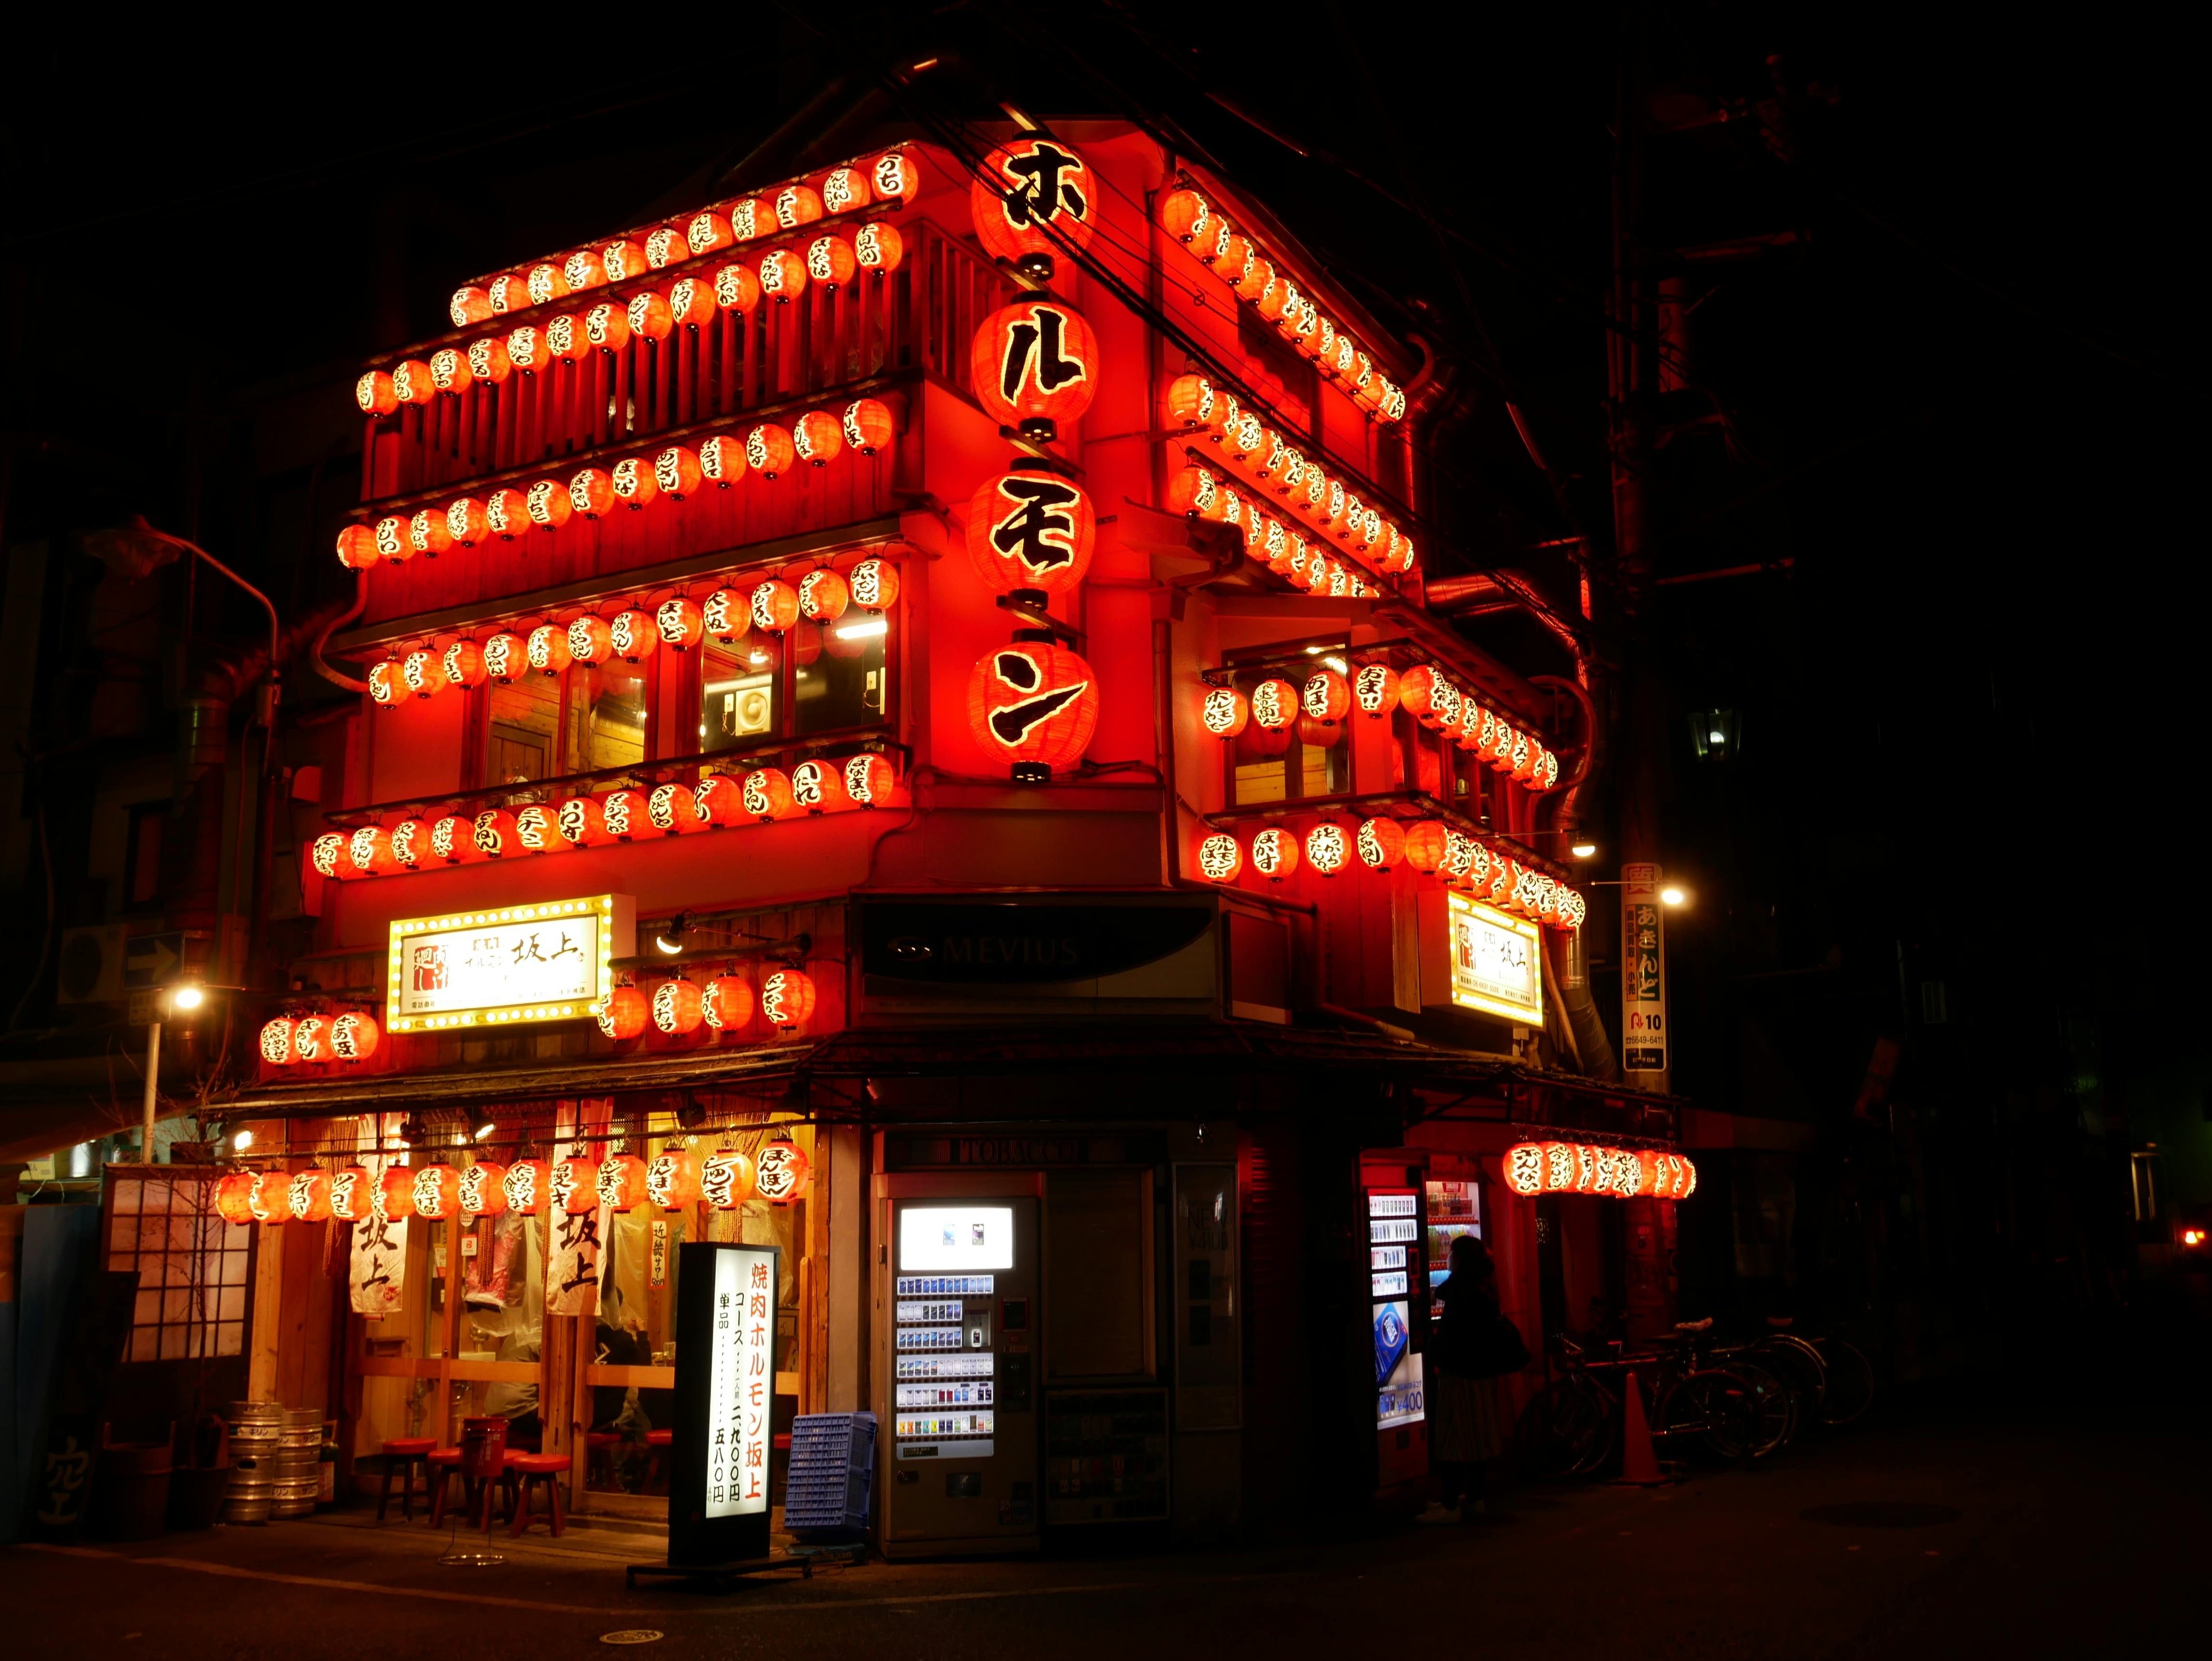 red and white concrete building during nighttime